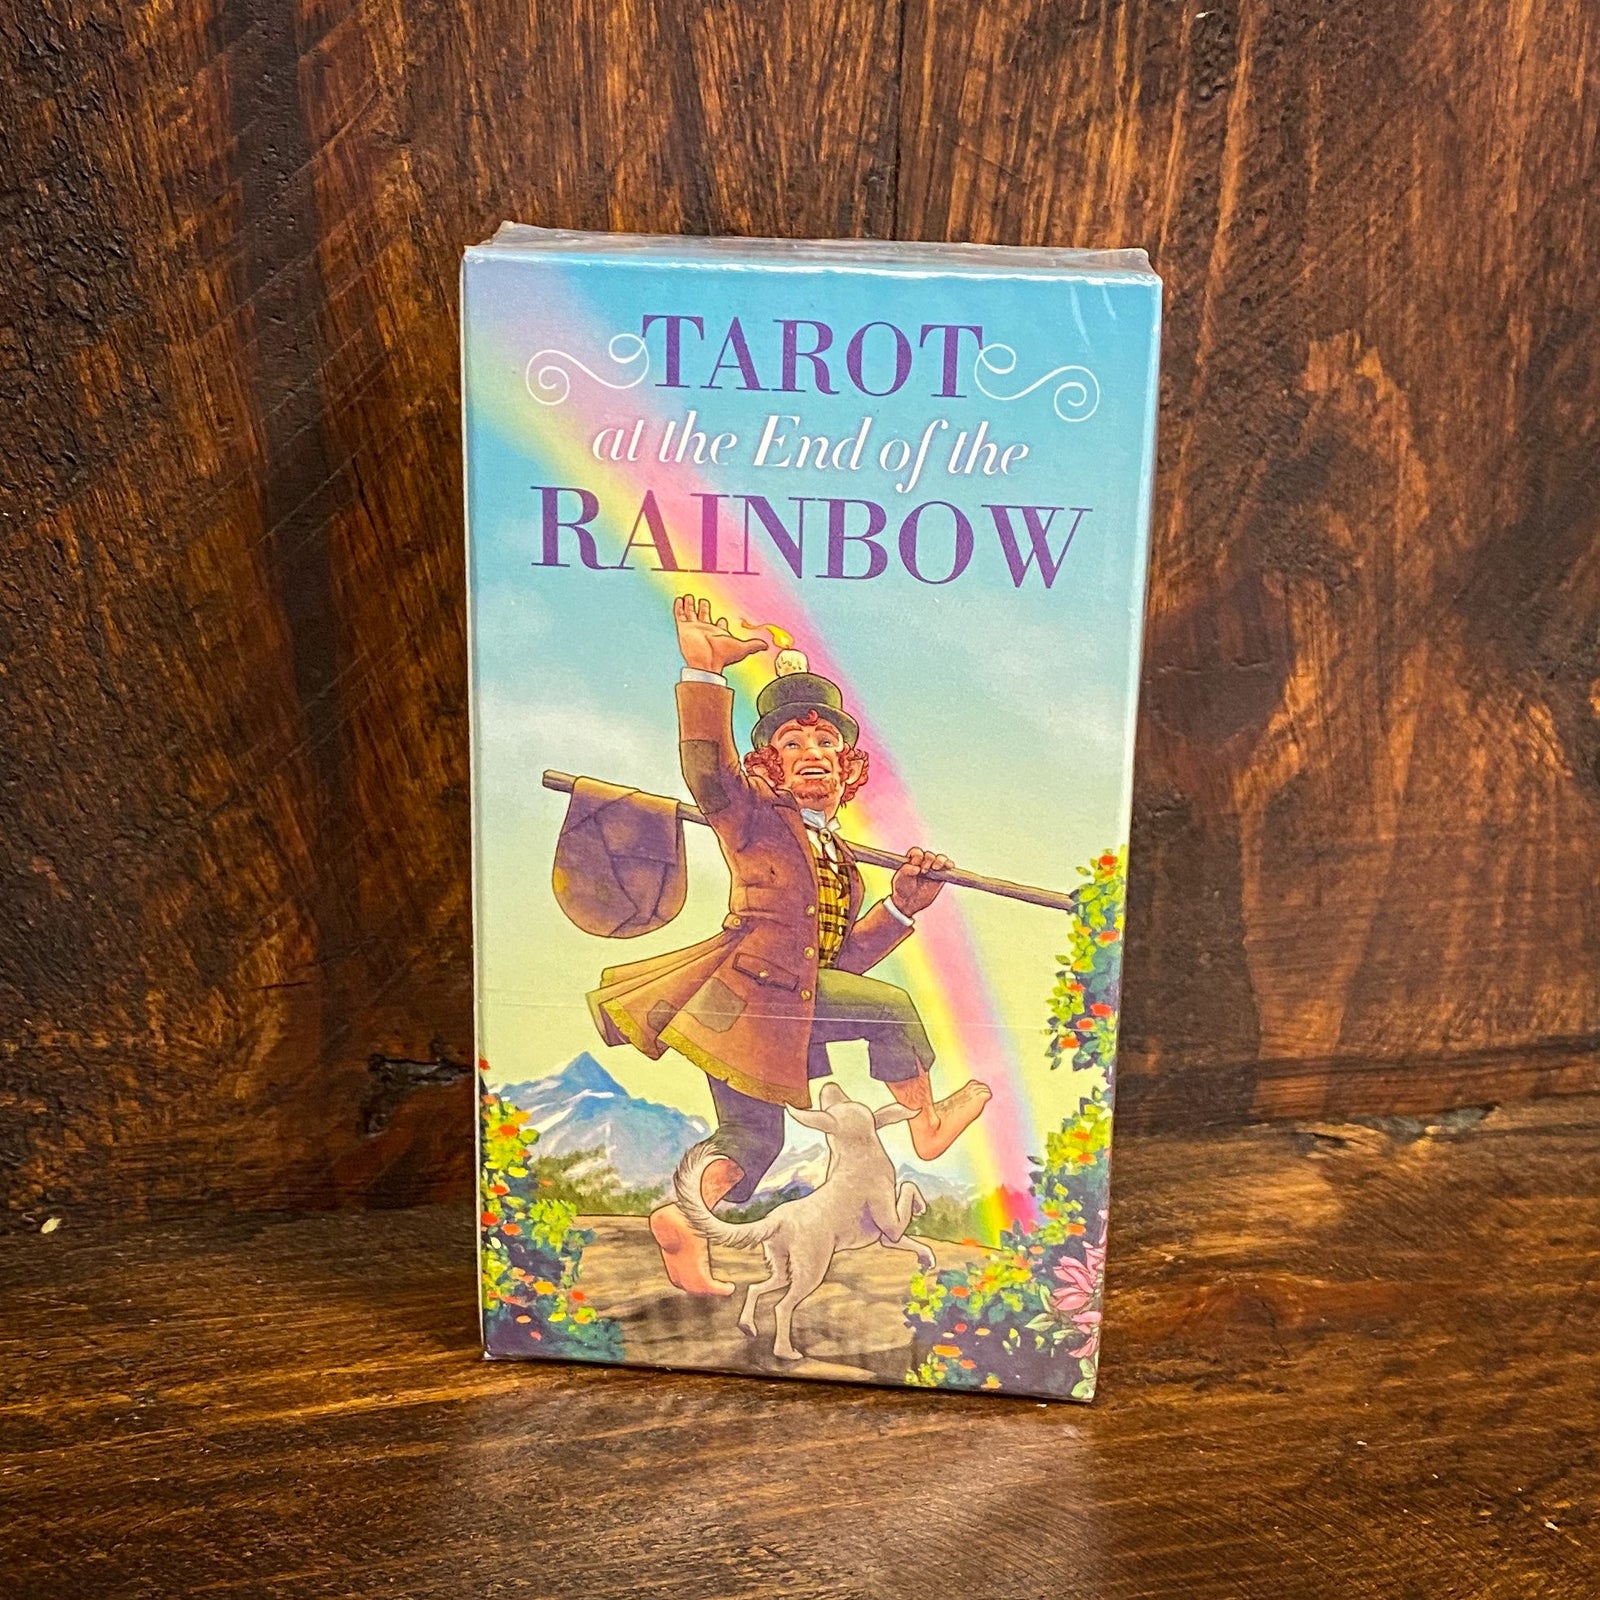 Tarot at the End of the Rainbow